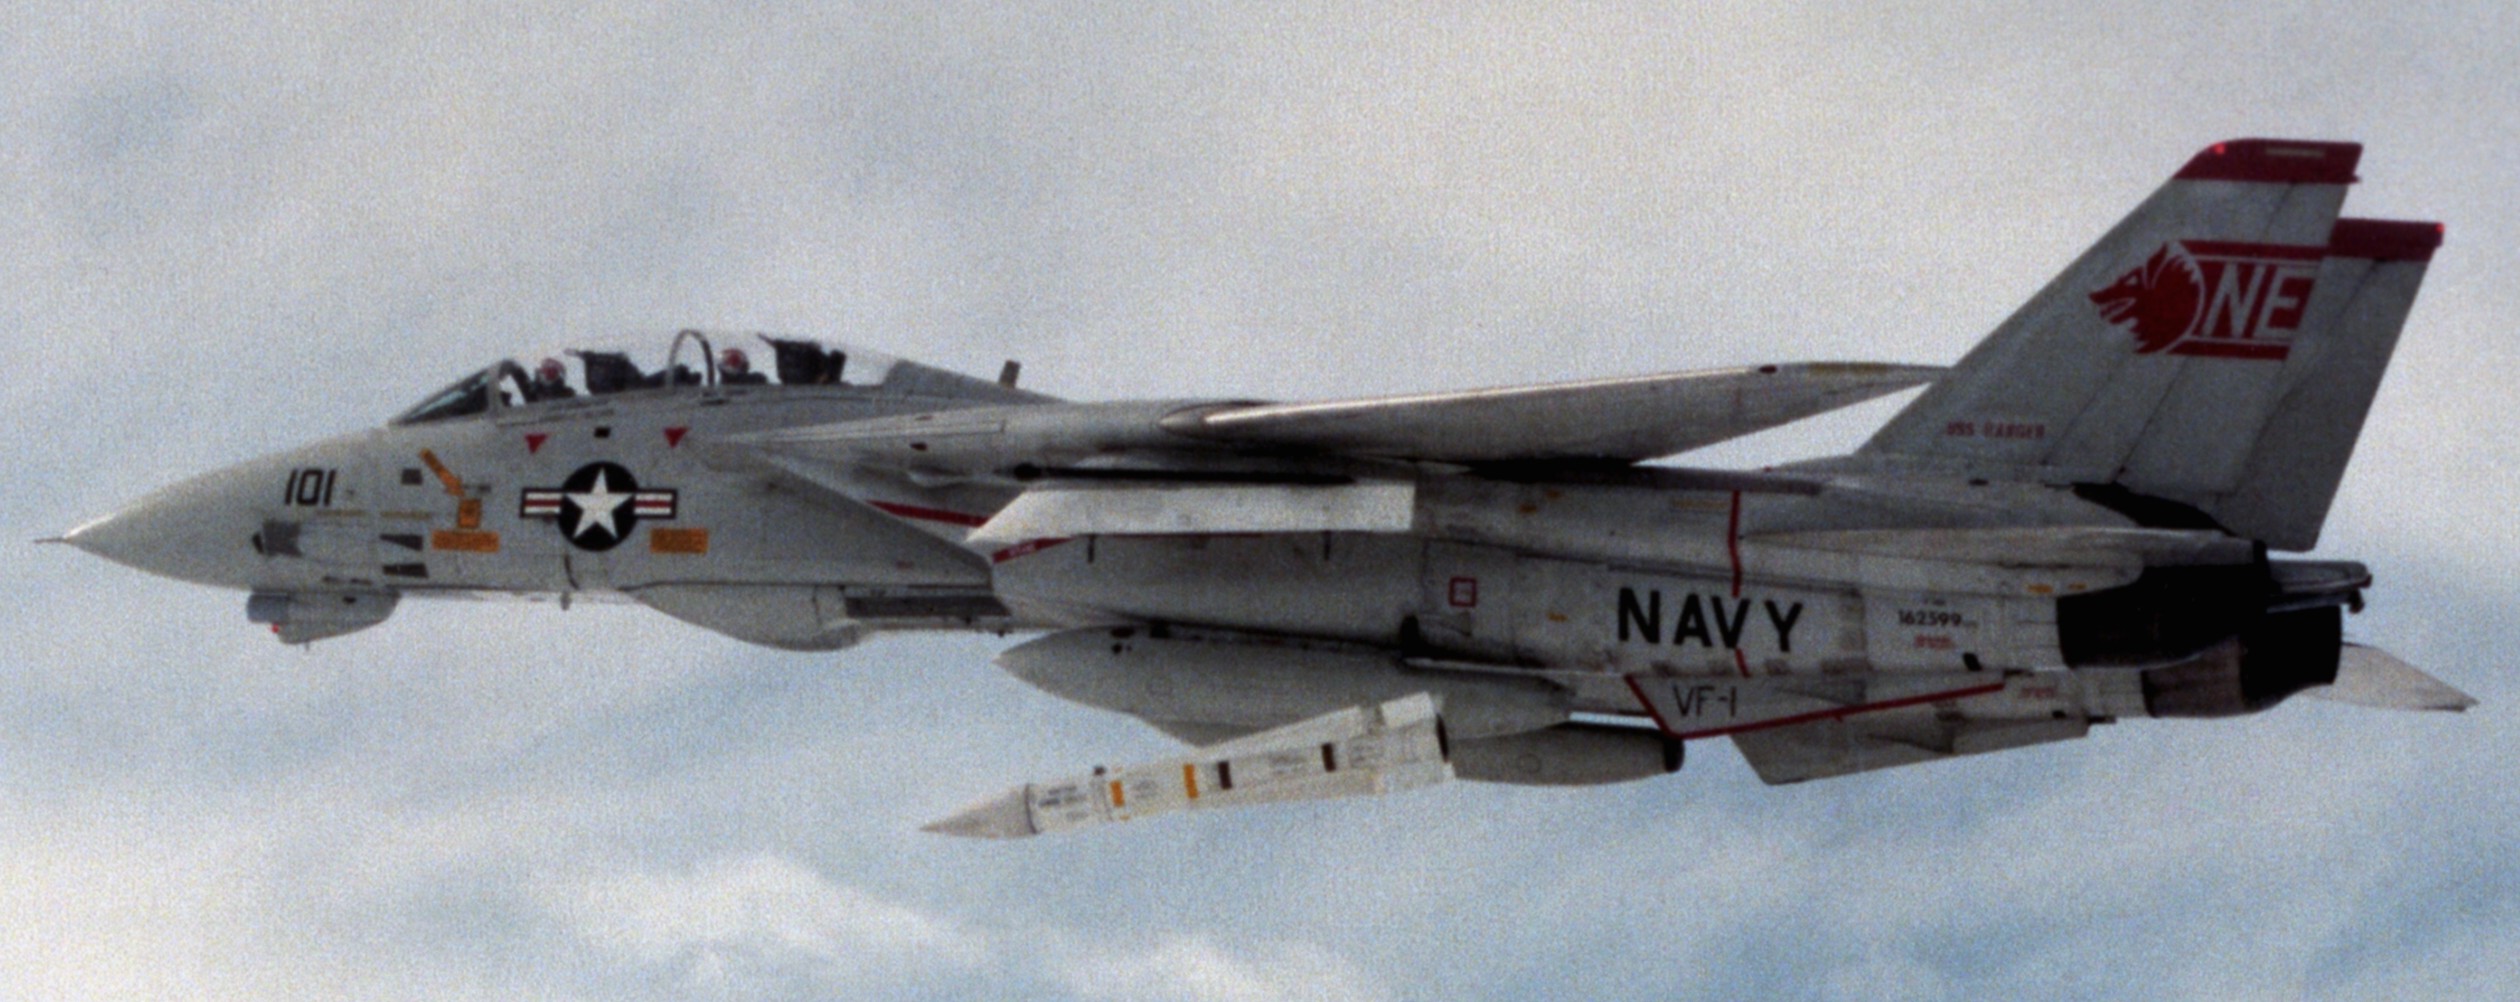 vf-1 wolfpack fighter squadron f-14a tomcat carrier air wing cvw-2 uss ranger cv-61 18 aim-54 phoenix missile